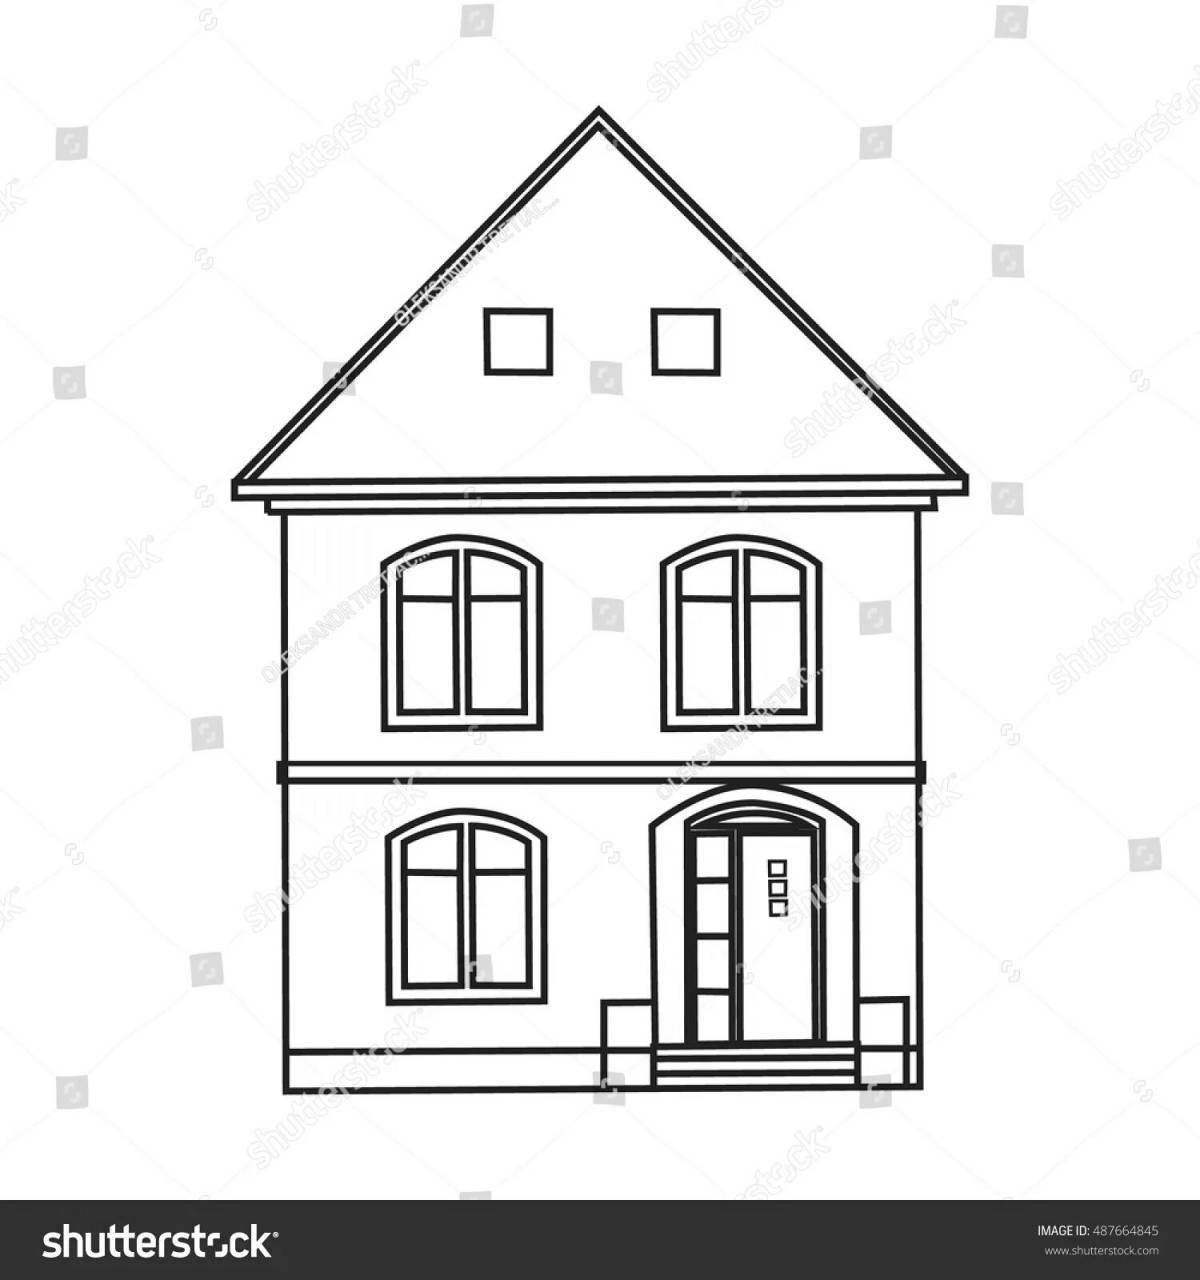 Amazing two story house coloring book for kids